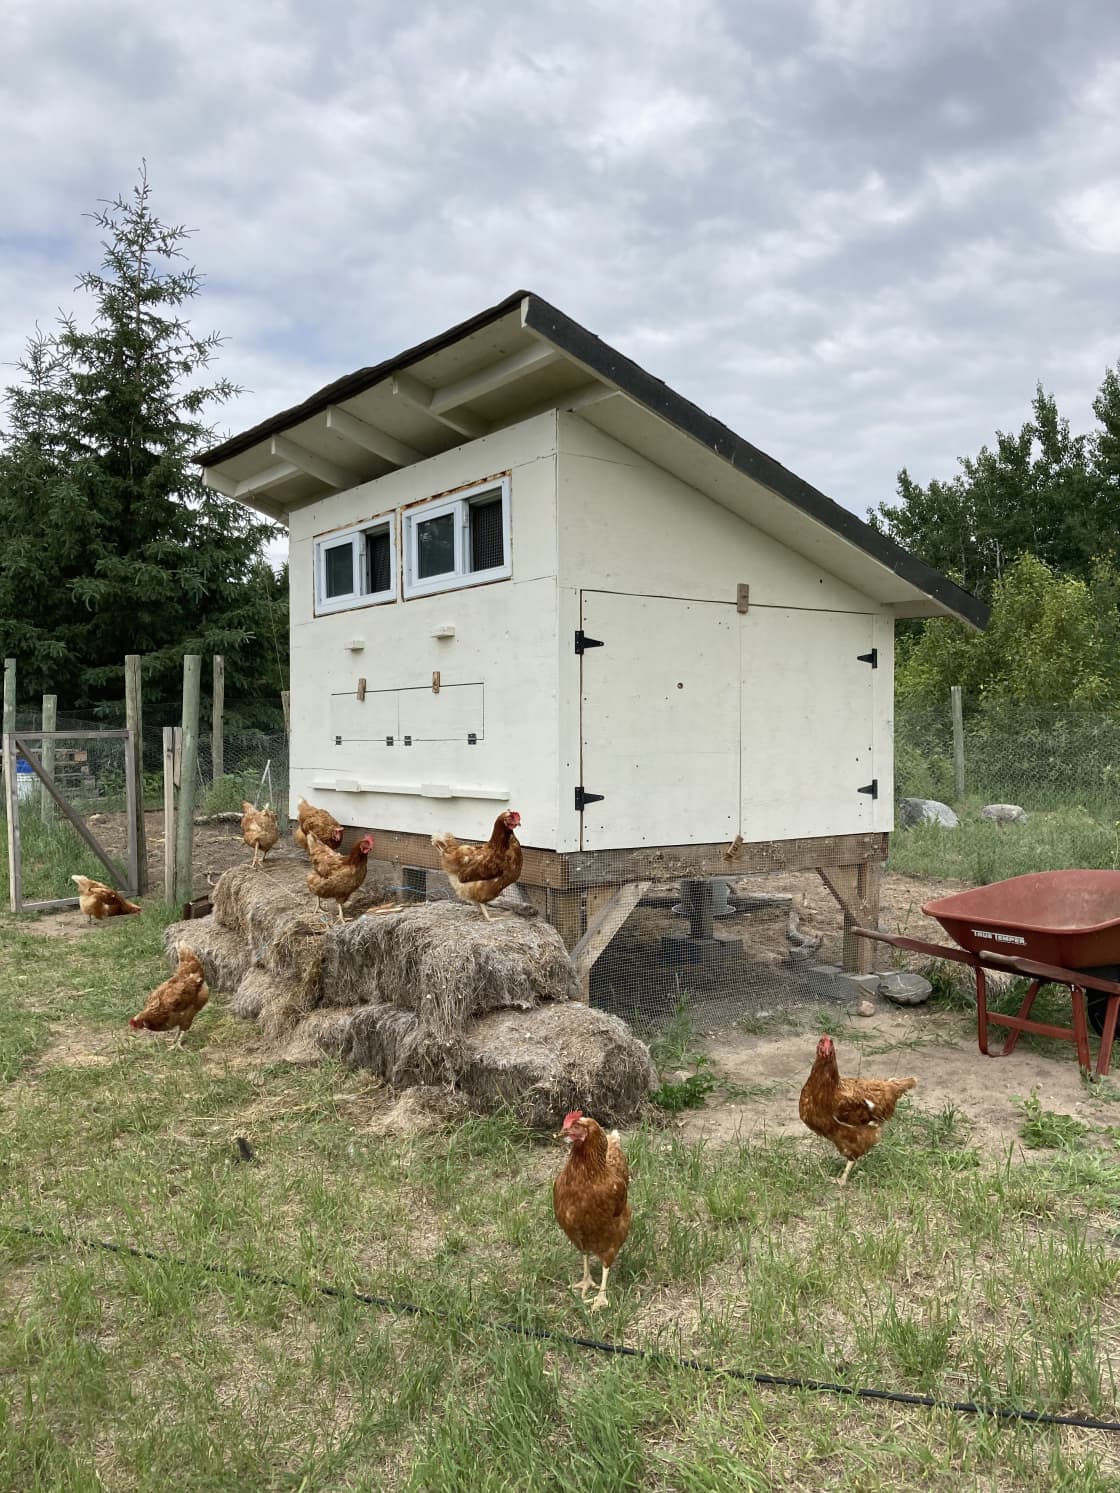 Say hello to the flock and grab some farm fresh eggs for breakfast right from the coop...